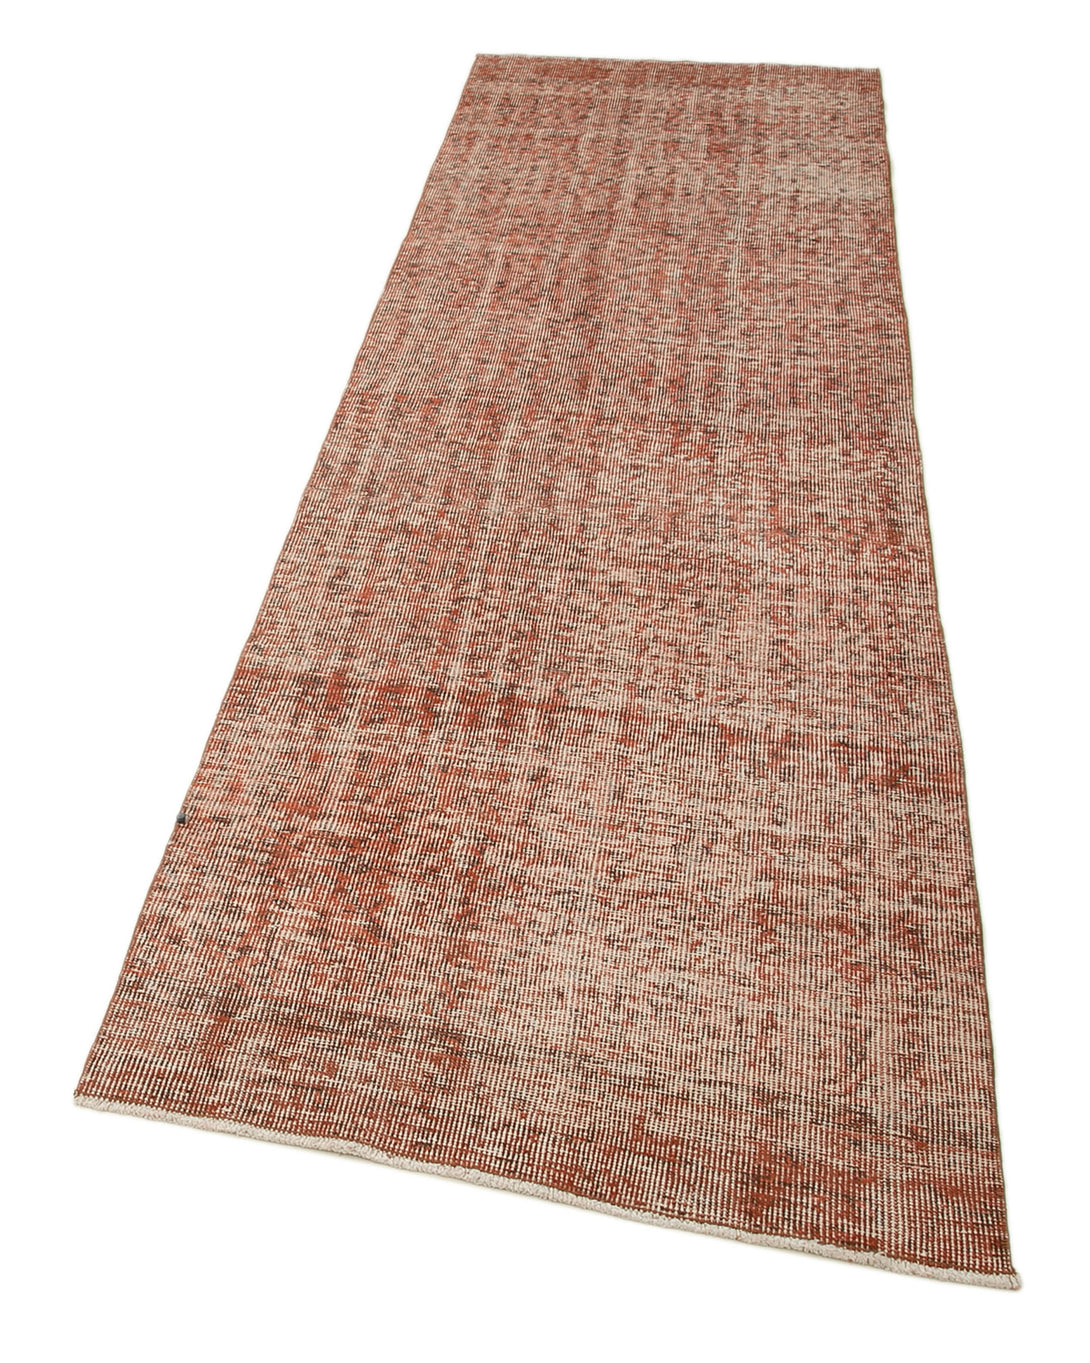 Handmade Overdyed Runner > Design# OL-AC-29757 > Size: 2'-10" x 9'-4", Carpet Culture Rugs, Handmade Rugs, NYC Rugs, New Rugs, Shop Rugs, Rug Store, Outlet Rugs, SoHo Rugs, Rugs in USA